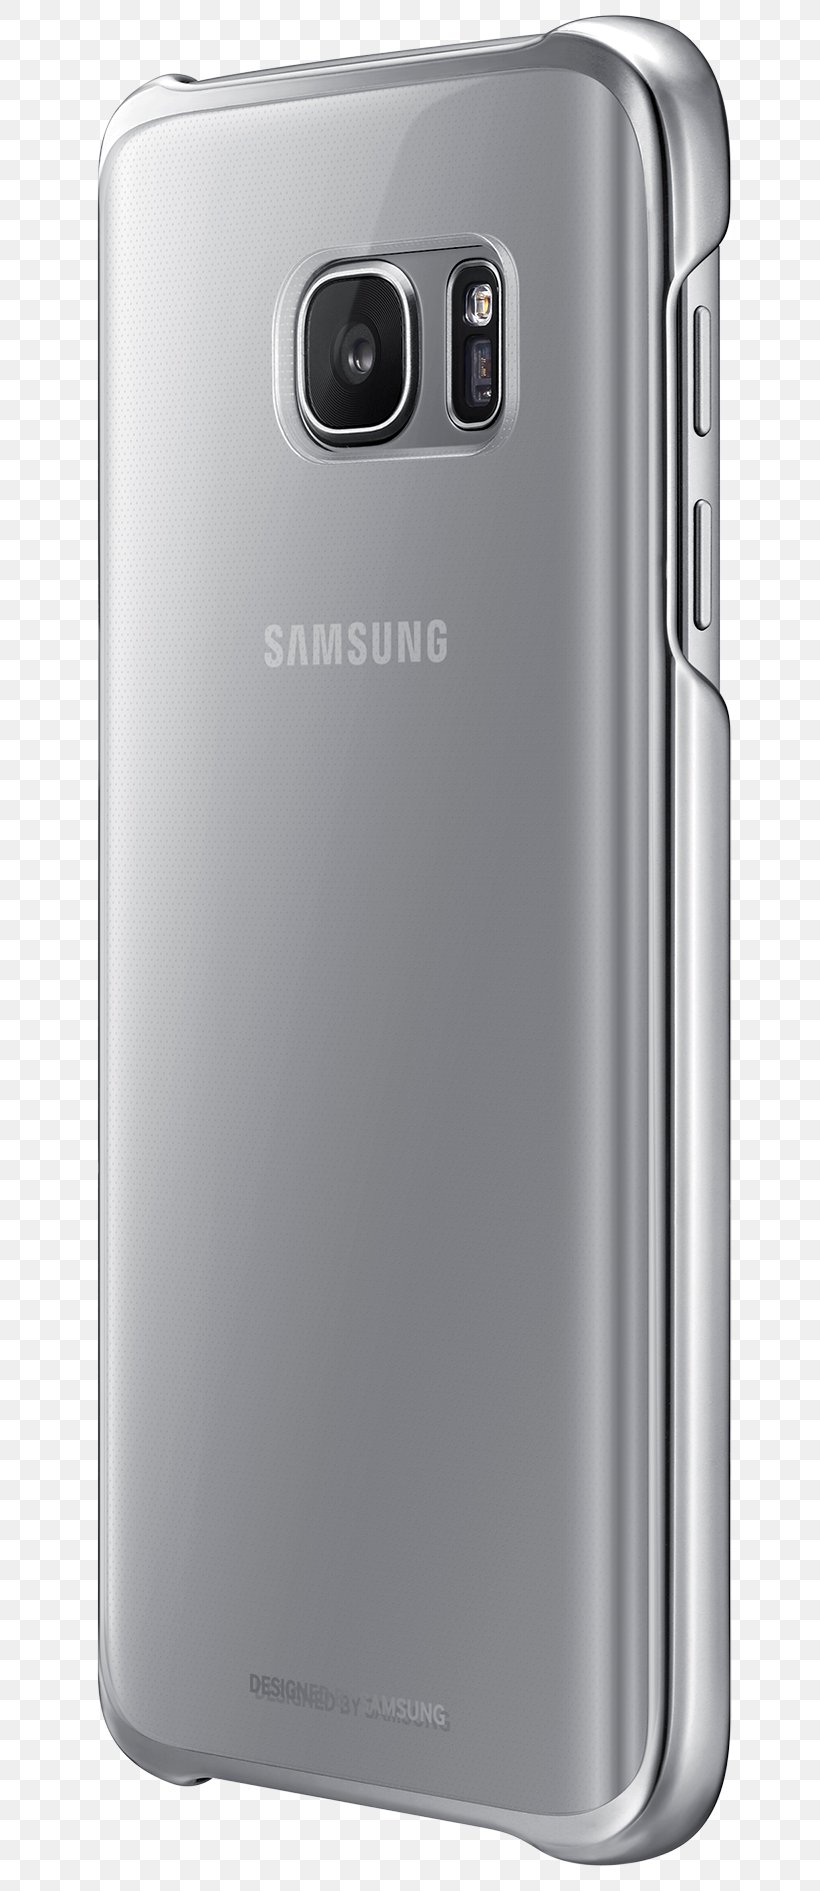 Samsung GALAXY S7 Edge Feature Phone Telephone, PNG, 683x1891px, Samsung Galaxy S7 Edge, Cellular Network, Communication Device, Electronic Device, Feature Phone Download Free